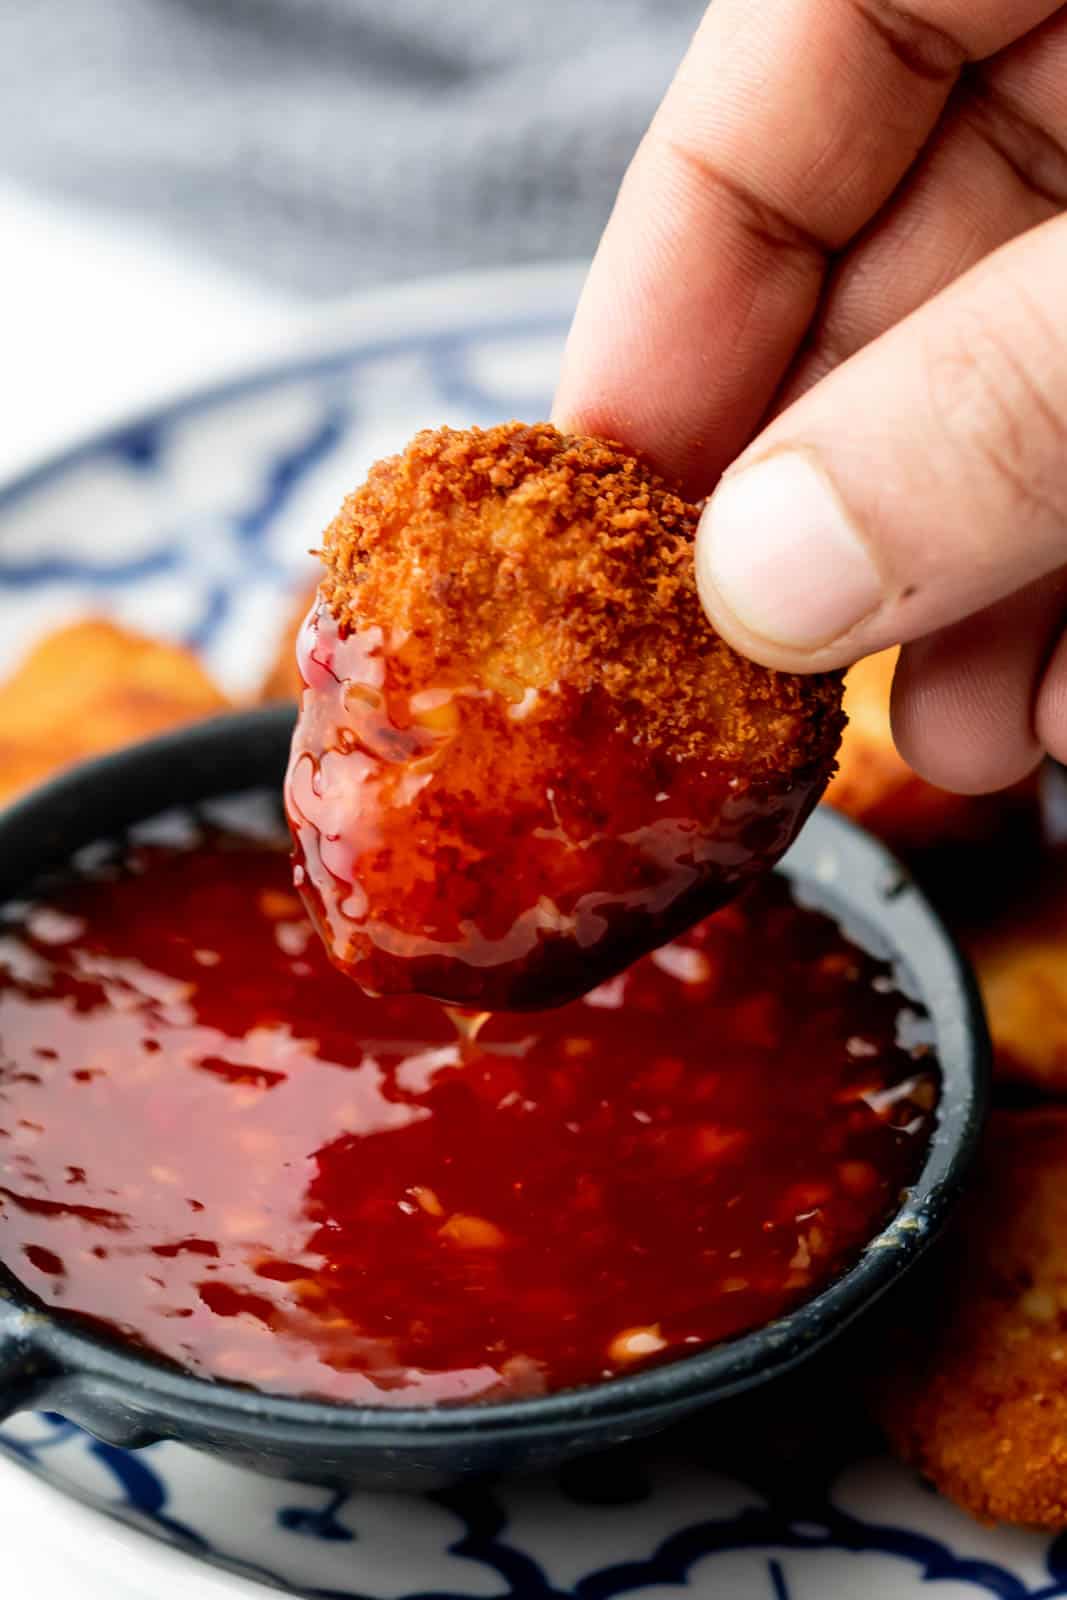 Chicken nugget being dipped into thai sweet chili sauce